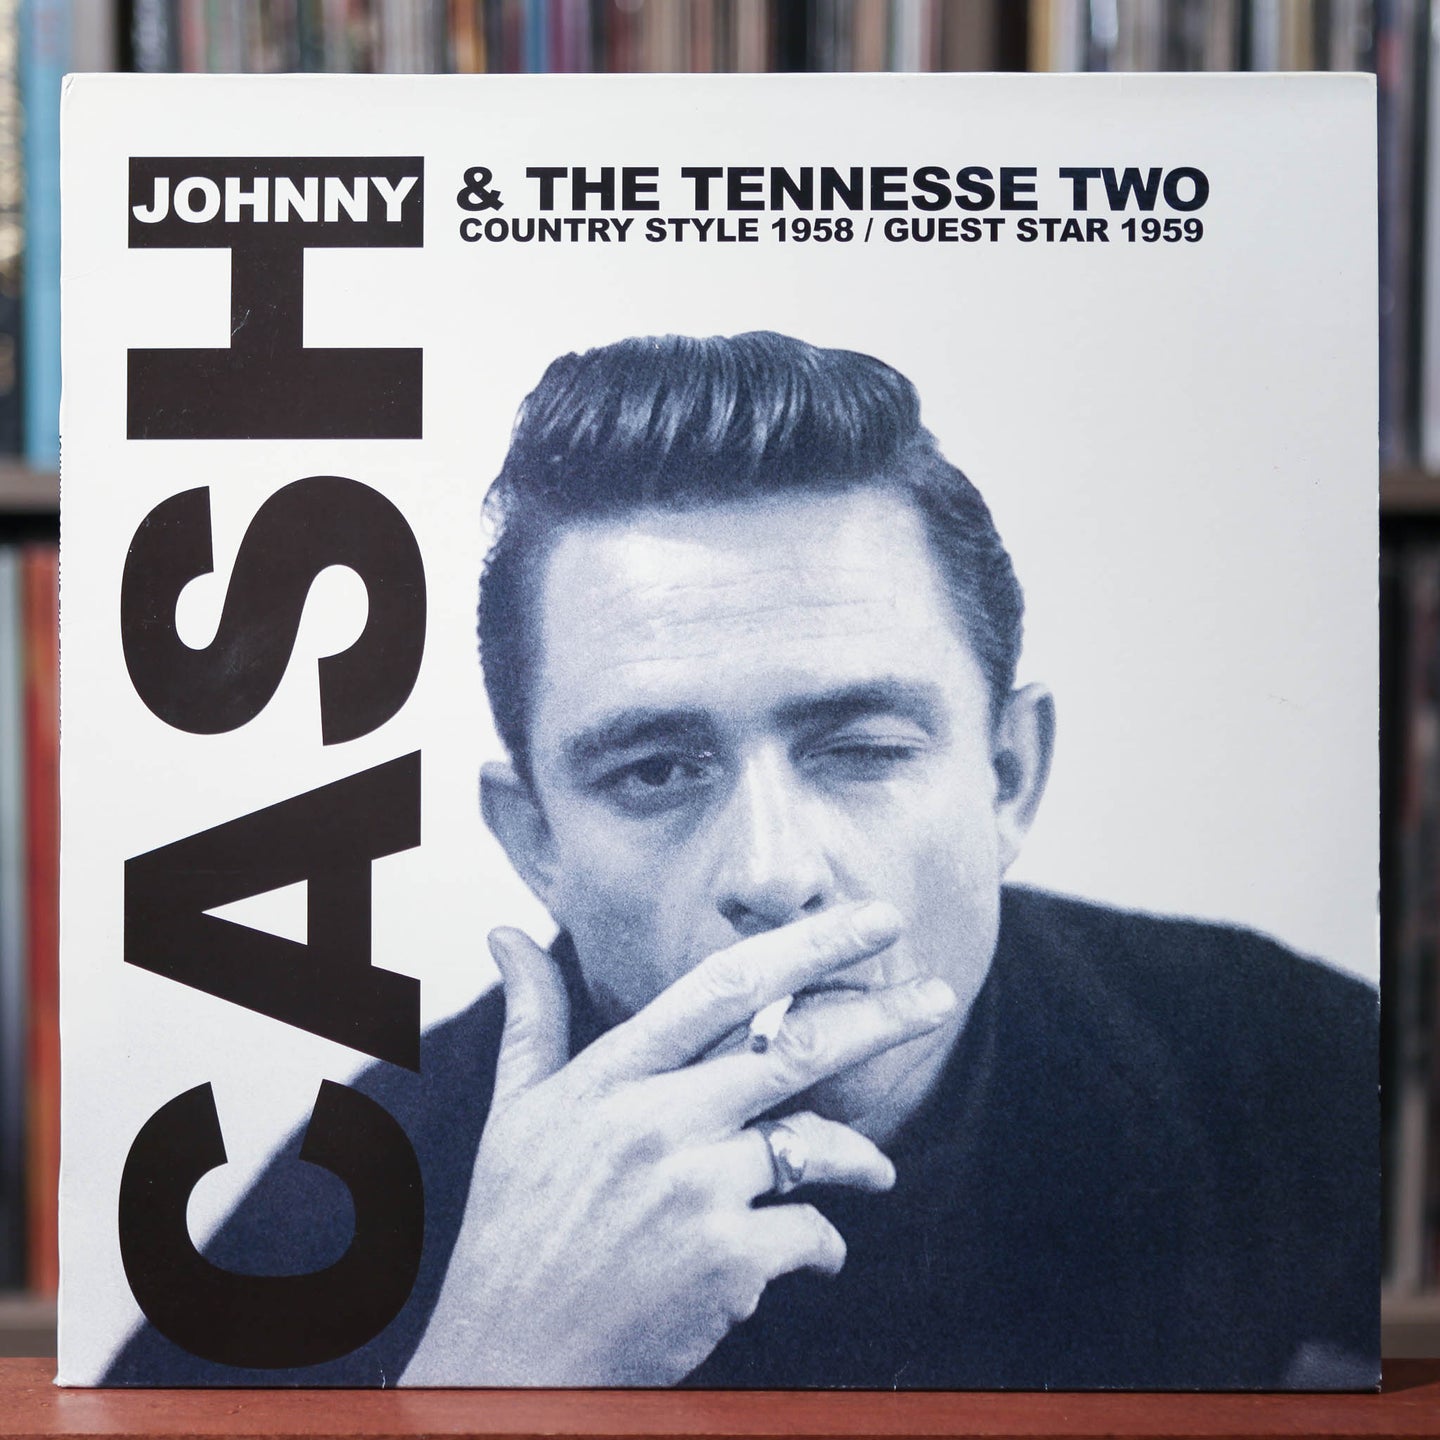 Johnny Cash & The Tennessee Two - Country Style 1958 / Guest Star 1959 - 2015 Klondike Records, VG+/EX w/Insert